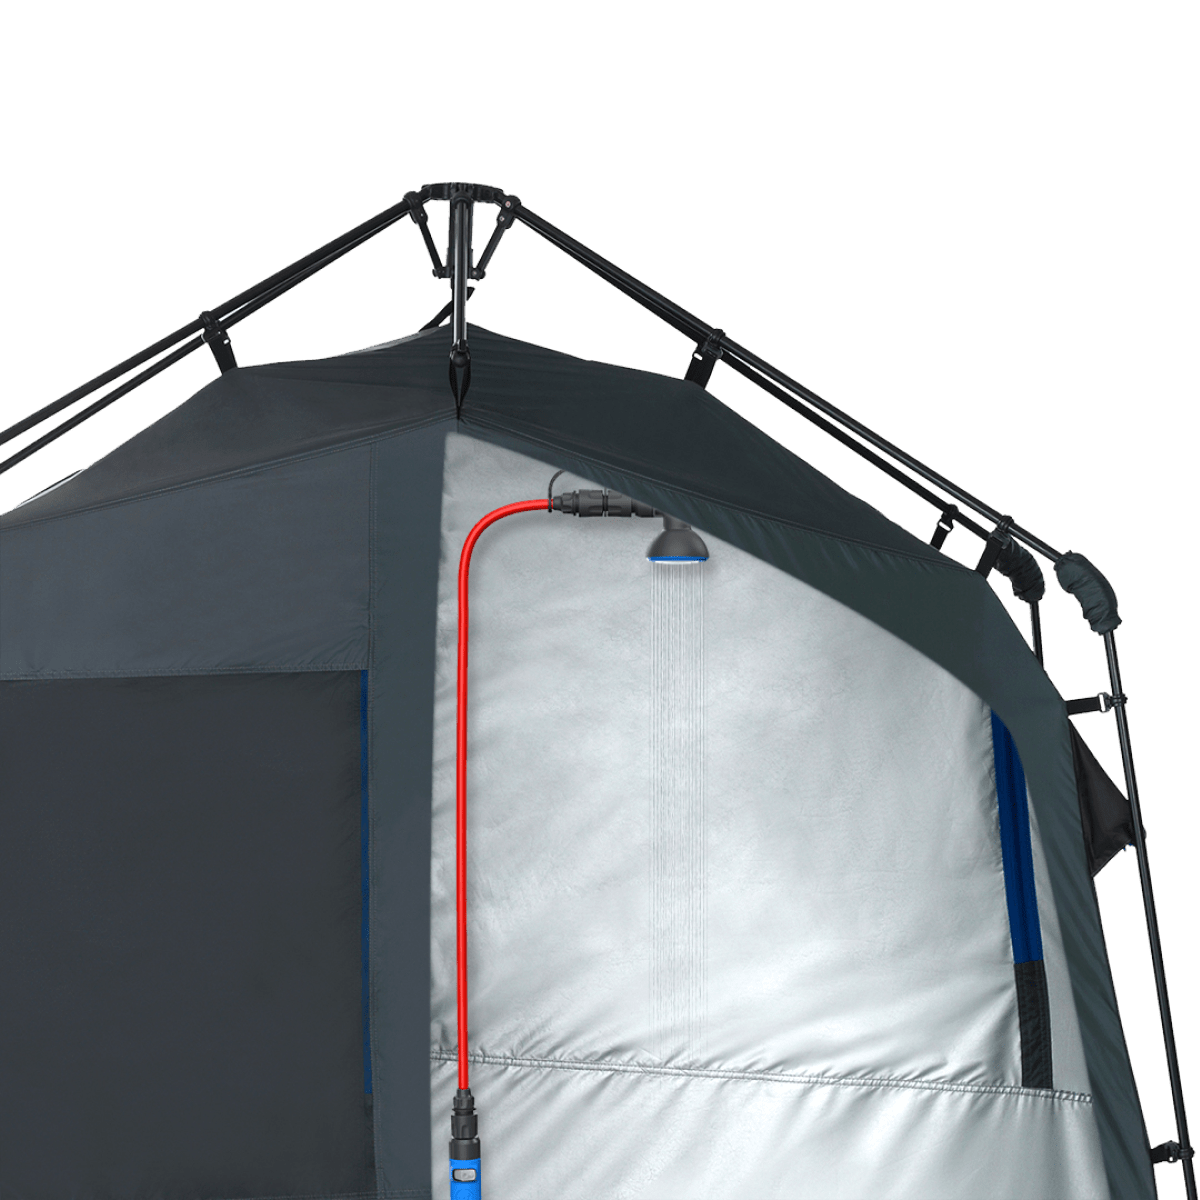 Shower tent with shower head attached